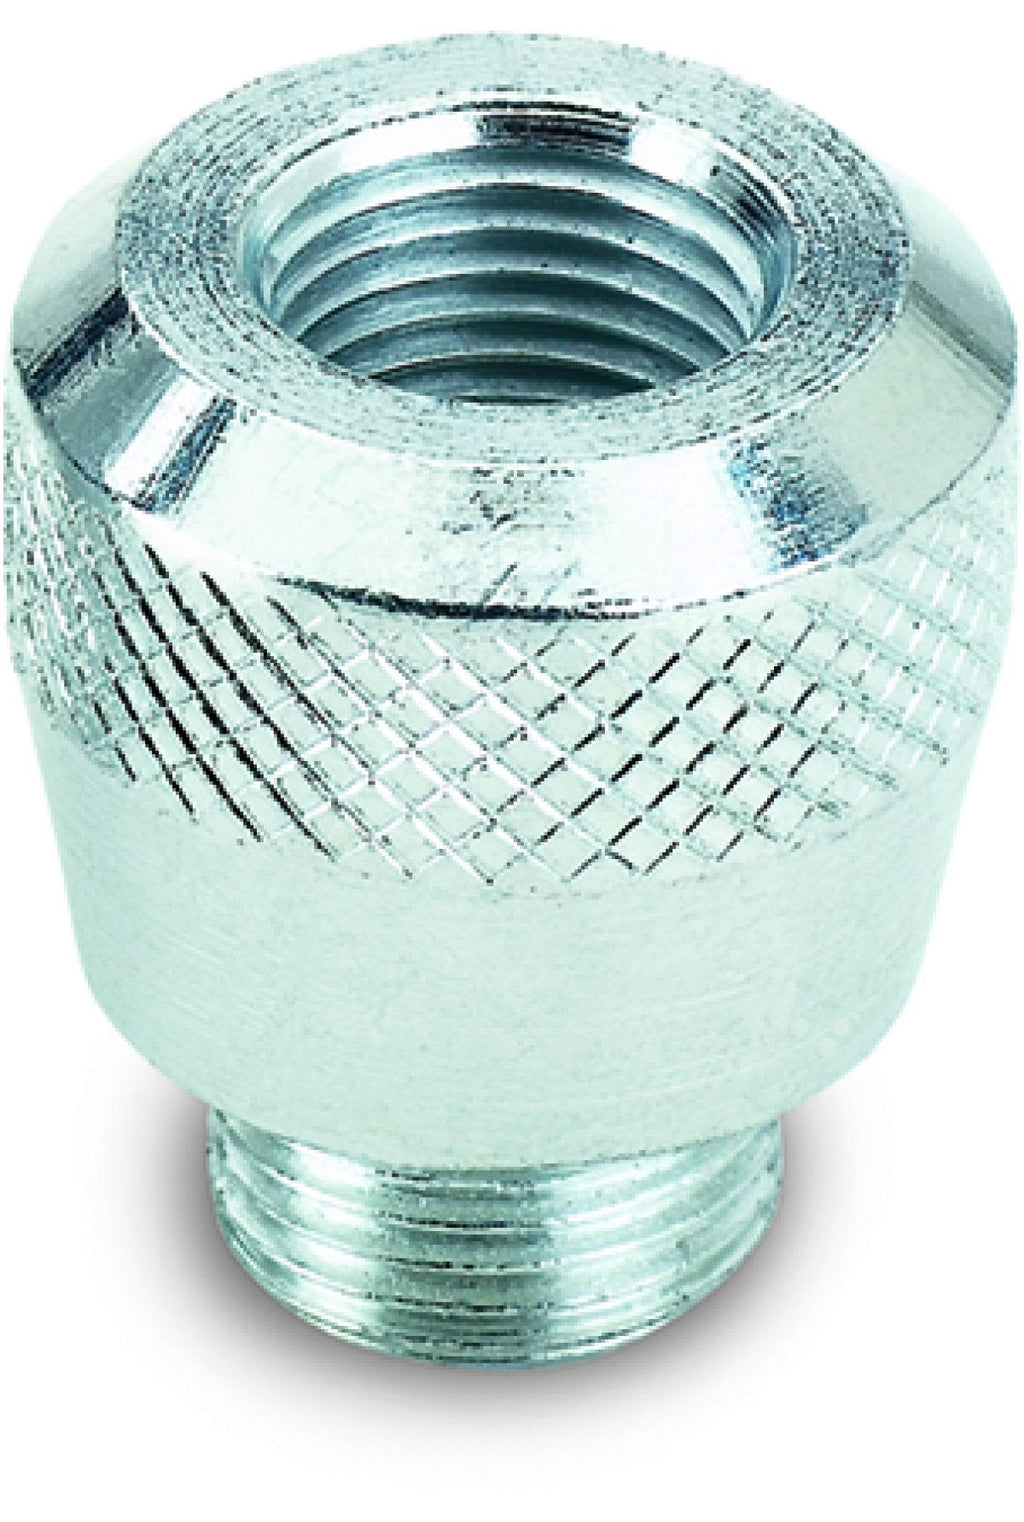 Lumax Silver LX-1454 7/16"-27 Male x 1/8" NPT Female Button Head Bushing Adapter. Zinc-Plated for Maximum Protection Against Corrosion. Recommended Working Pressure: 3,000 PSI - LeoForward Australia